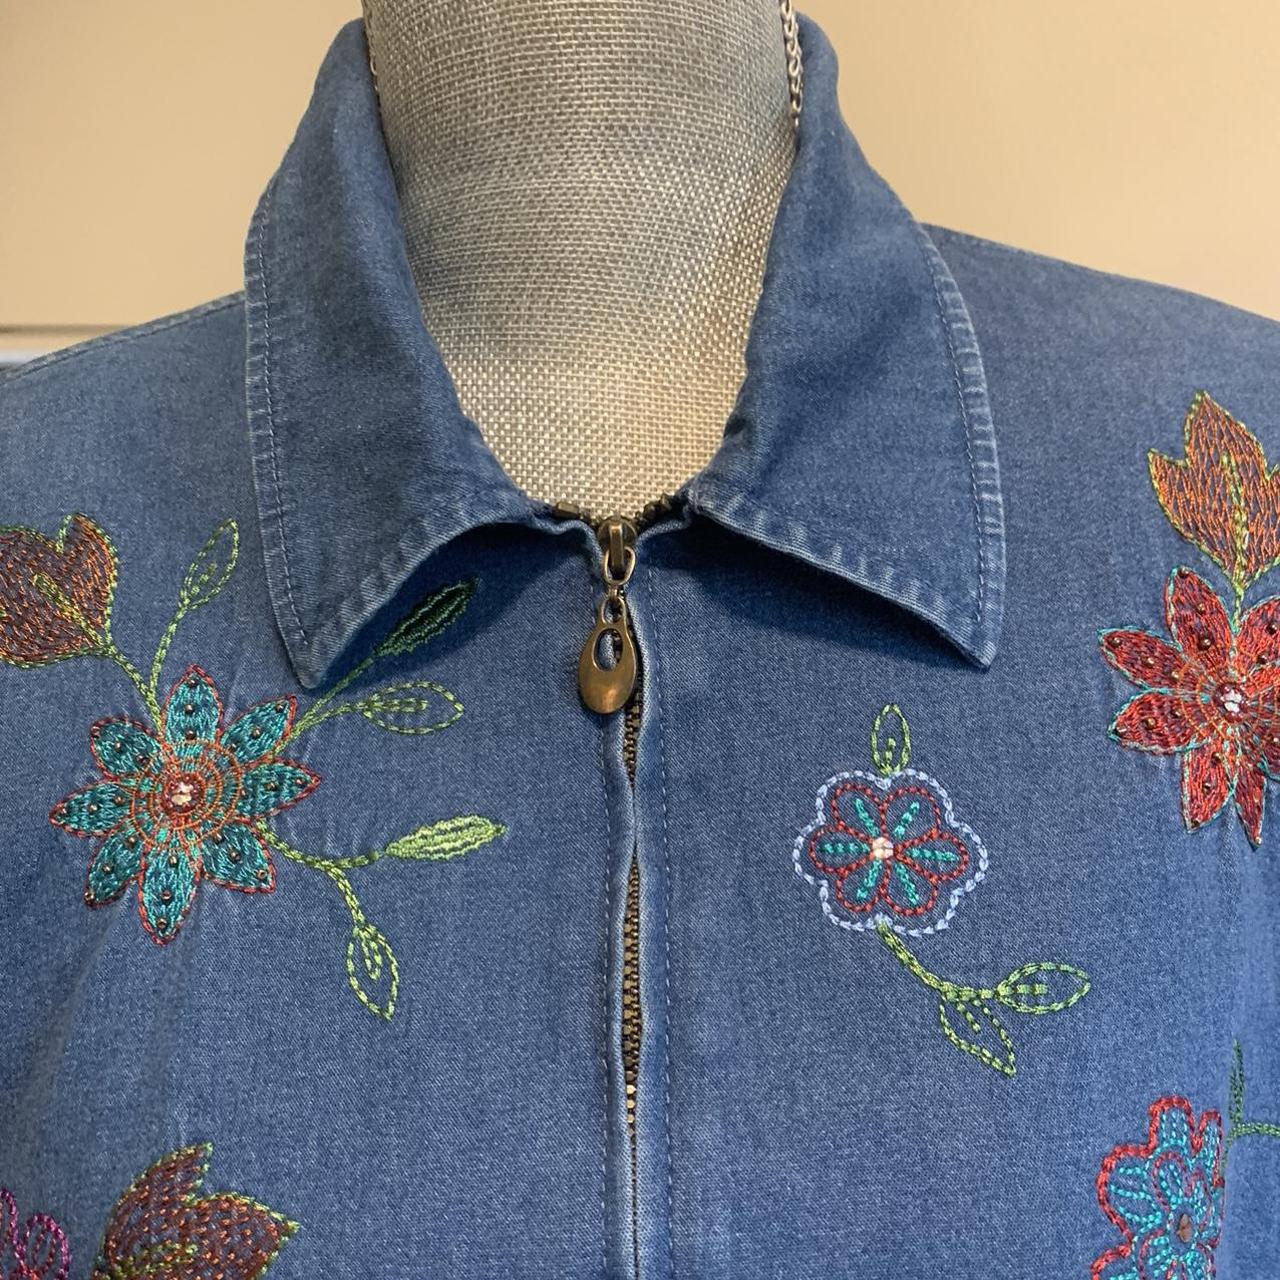 Alfred Dunner Retro Jean Jacket with details #retro - Depop